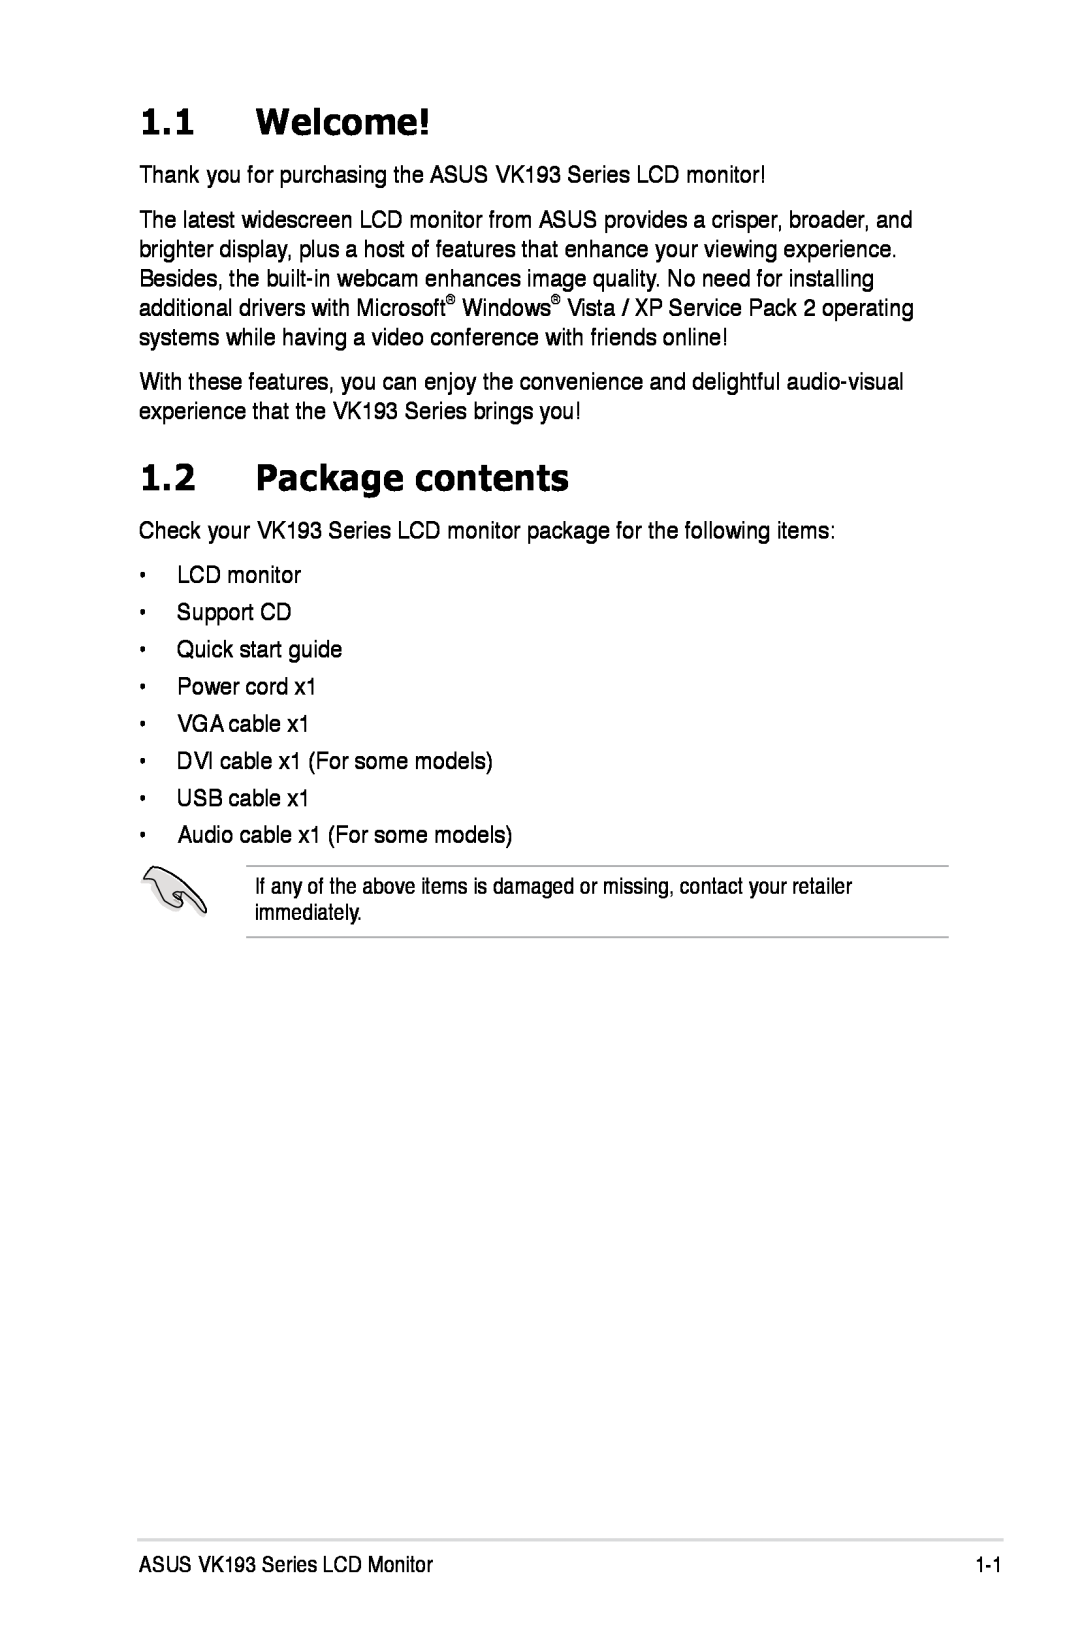 Asus VK193 manual Welcome, Package contents 